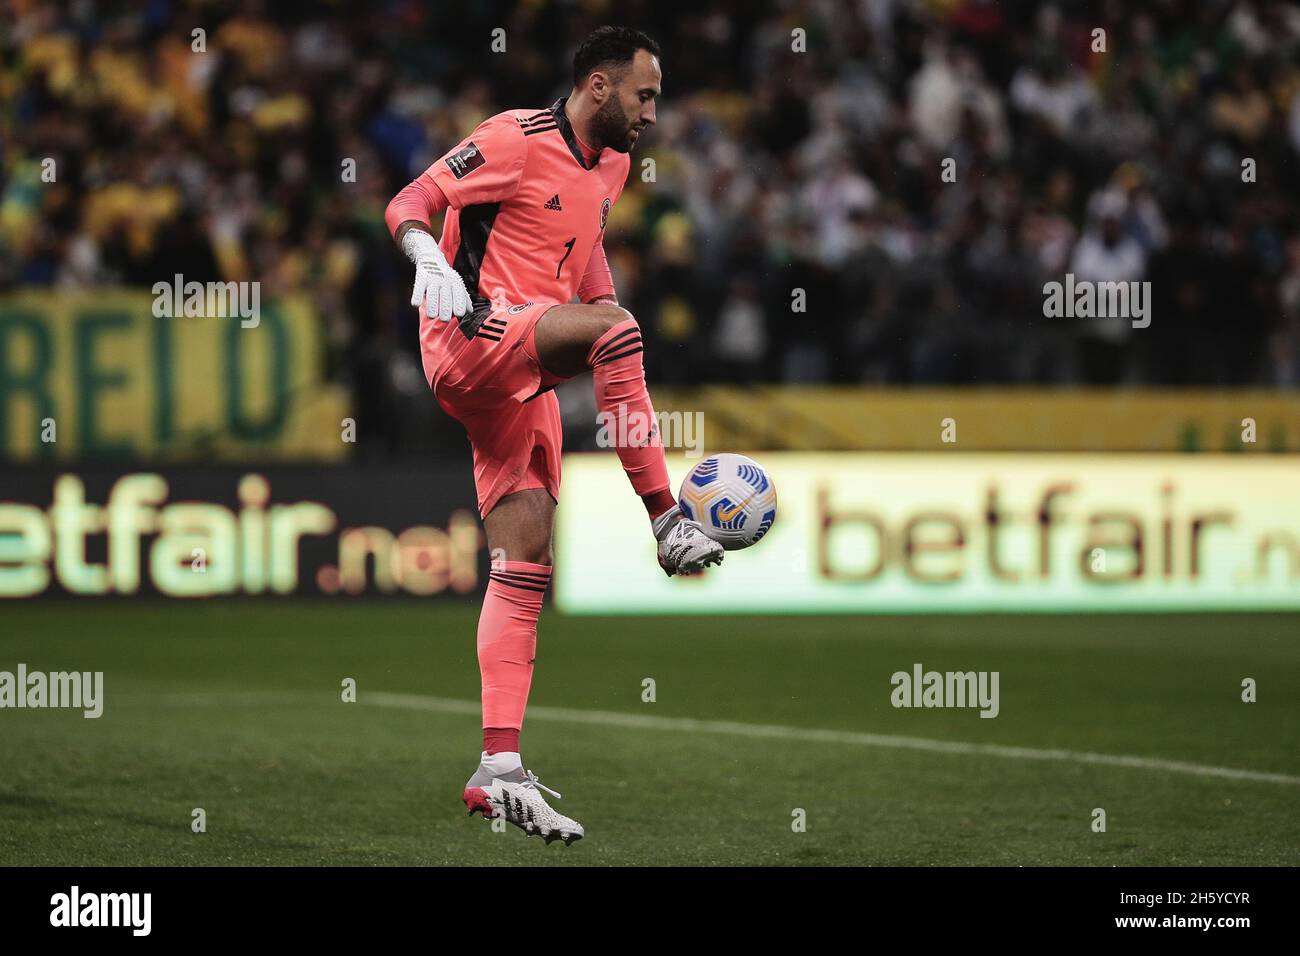 Sao Paulo, Brazil. 12th Nov, 2021. SP - Sao Paulo - 11/11/2021 - WORLD CUP 2022 PLAYOFFS, BRAZIL X COLOMBIA - Ospina goalkeeper of Colombia during match against Brazil at Arena Corinthians stadium for World Cup 2022 qualifiers. Photo: Ettore Chiereguini/AGIF/Sipa USA Credit: Sipa USA/Alamy Live News Credit: Sipa USA/Alamy Live News Stock Photo